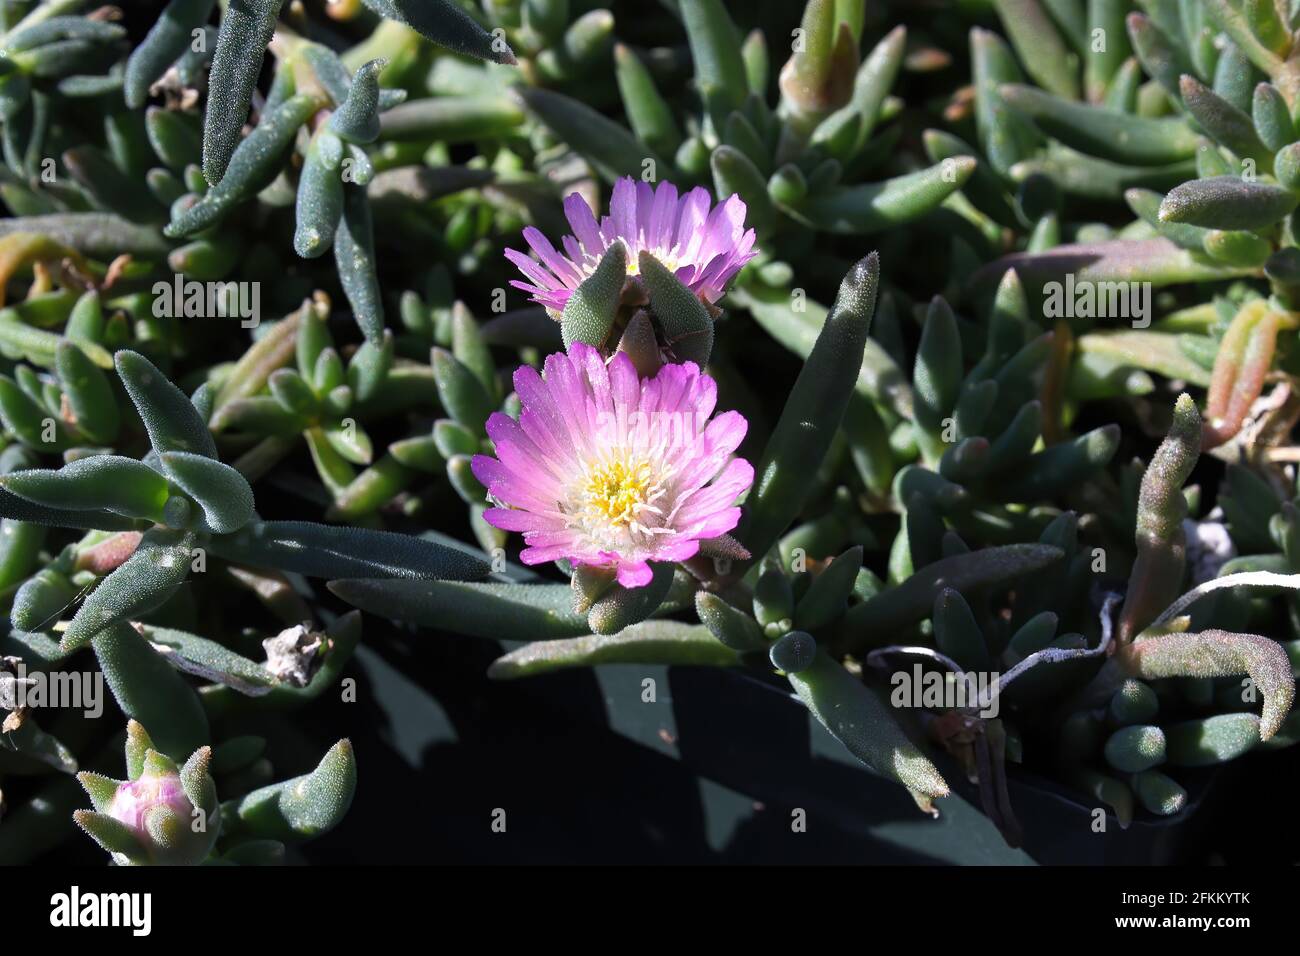 Closeup of flowers on the trailing ice plant Lampranthus Stock Photo